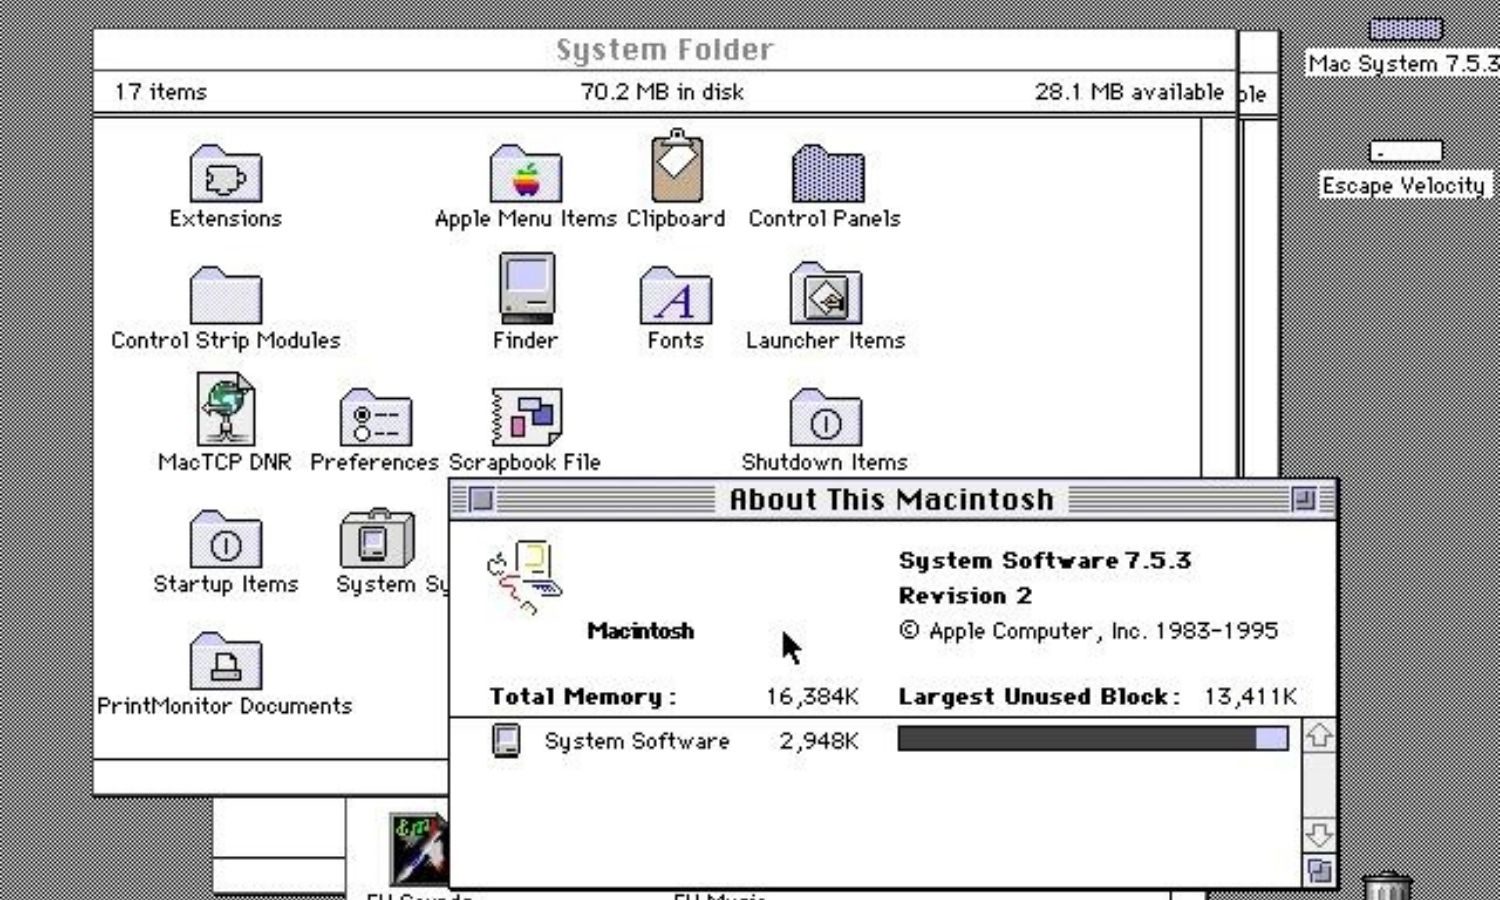 OTD in 1991: Apple released its Macintosh System 7.0.